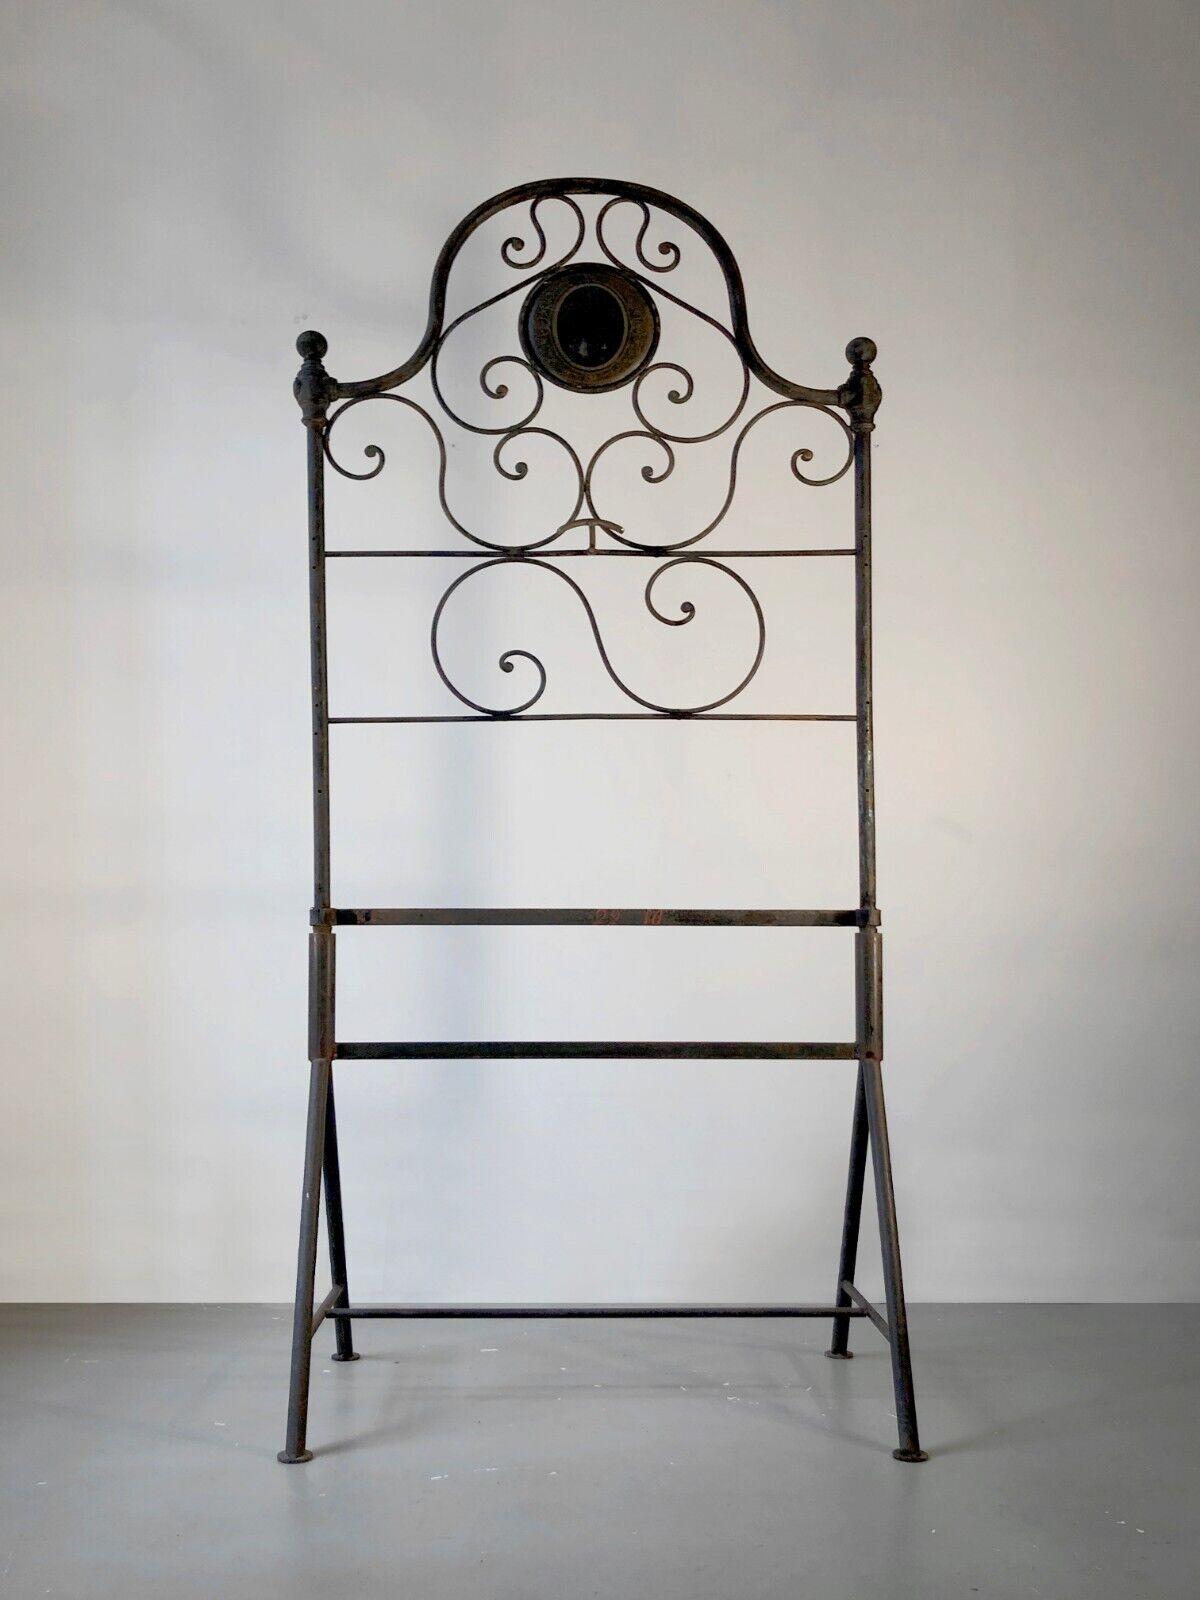 DESCRIPTION: A spectacular and decorative coat rack or valet stand or fashion display, Art-Deco, Neo-Classical, Art-Nouveau, in 2 parts: lower part: solid wrought iron structure with 4 legs, and upper part with slide into the lower part: upper